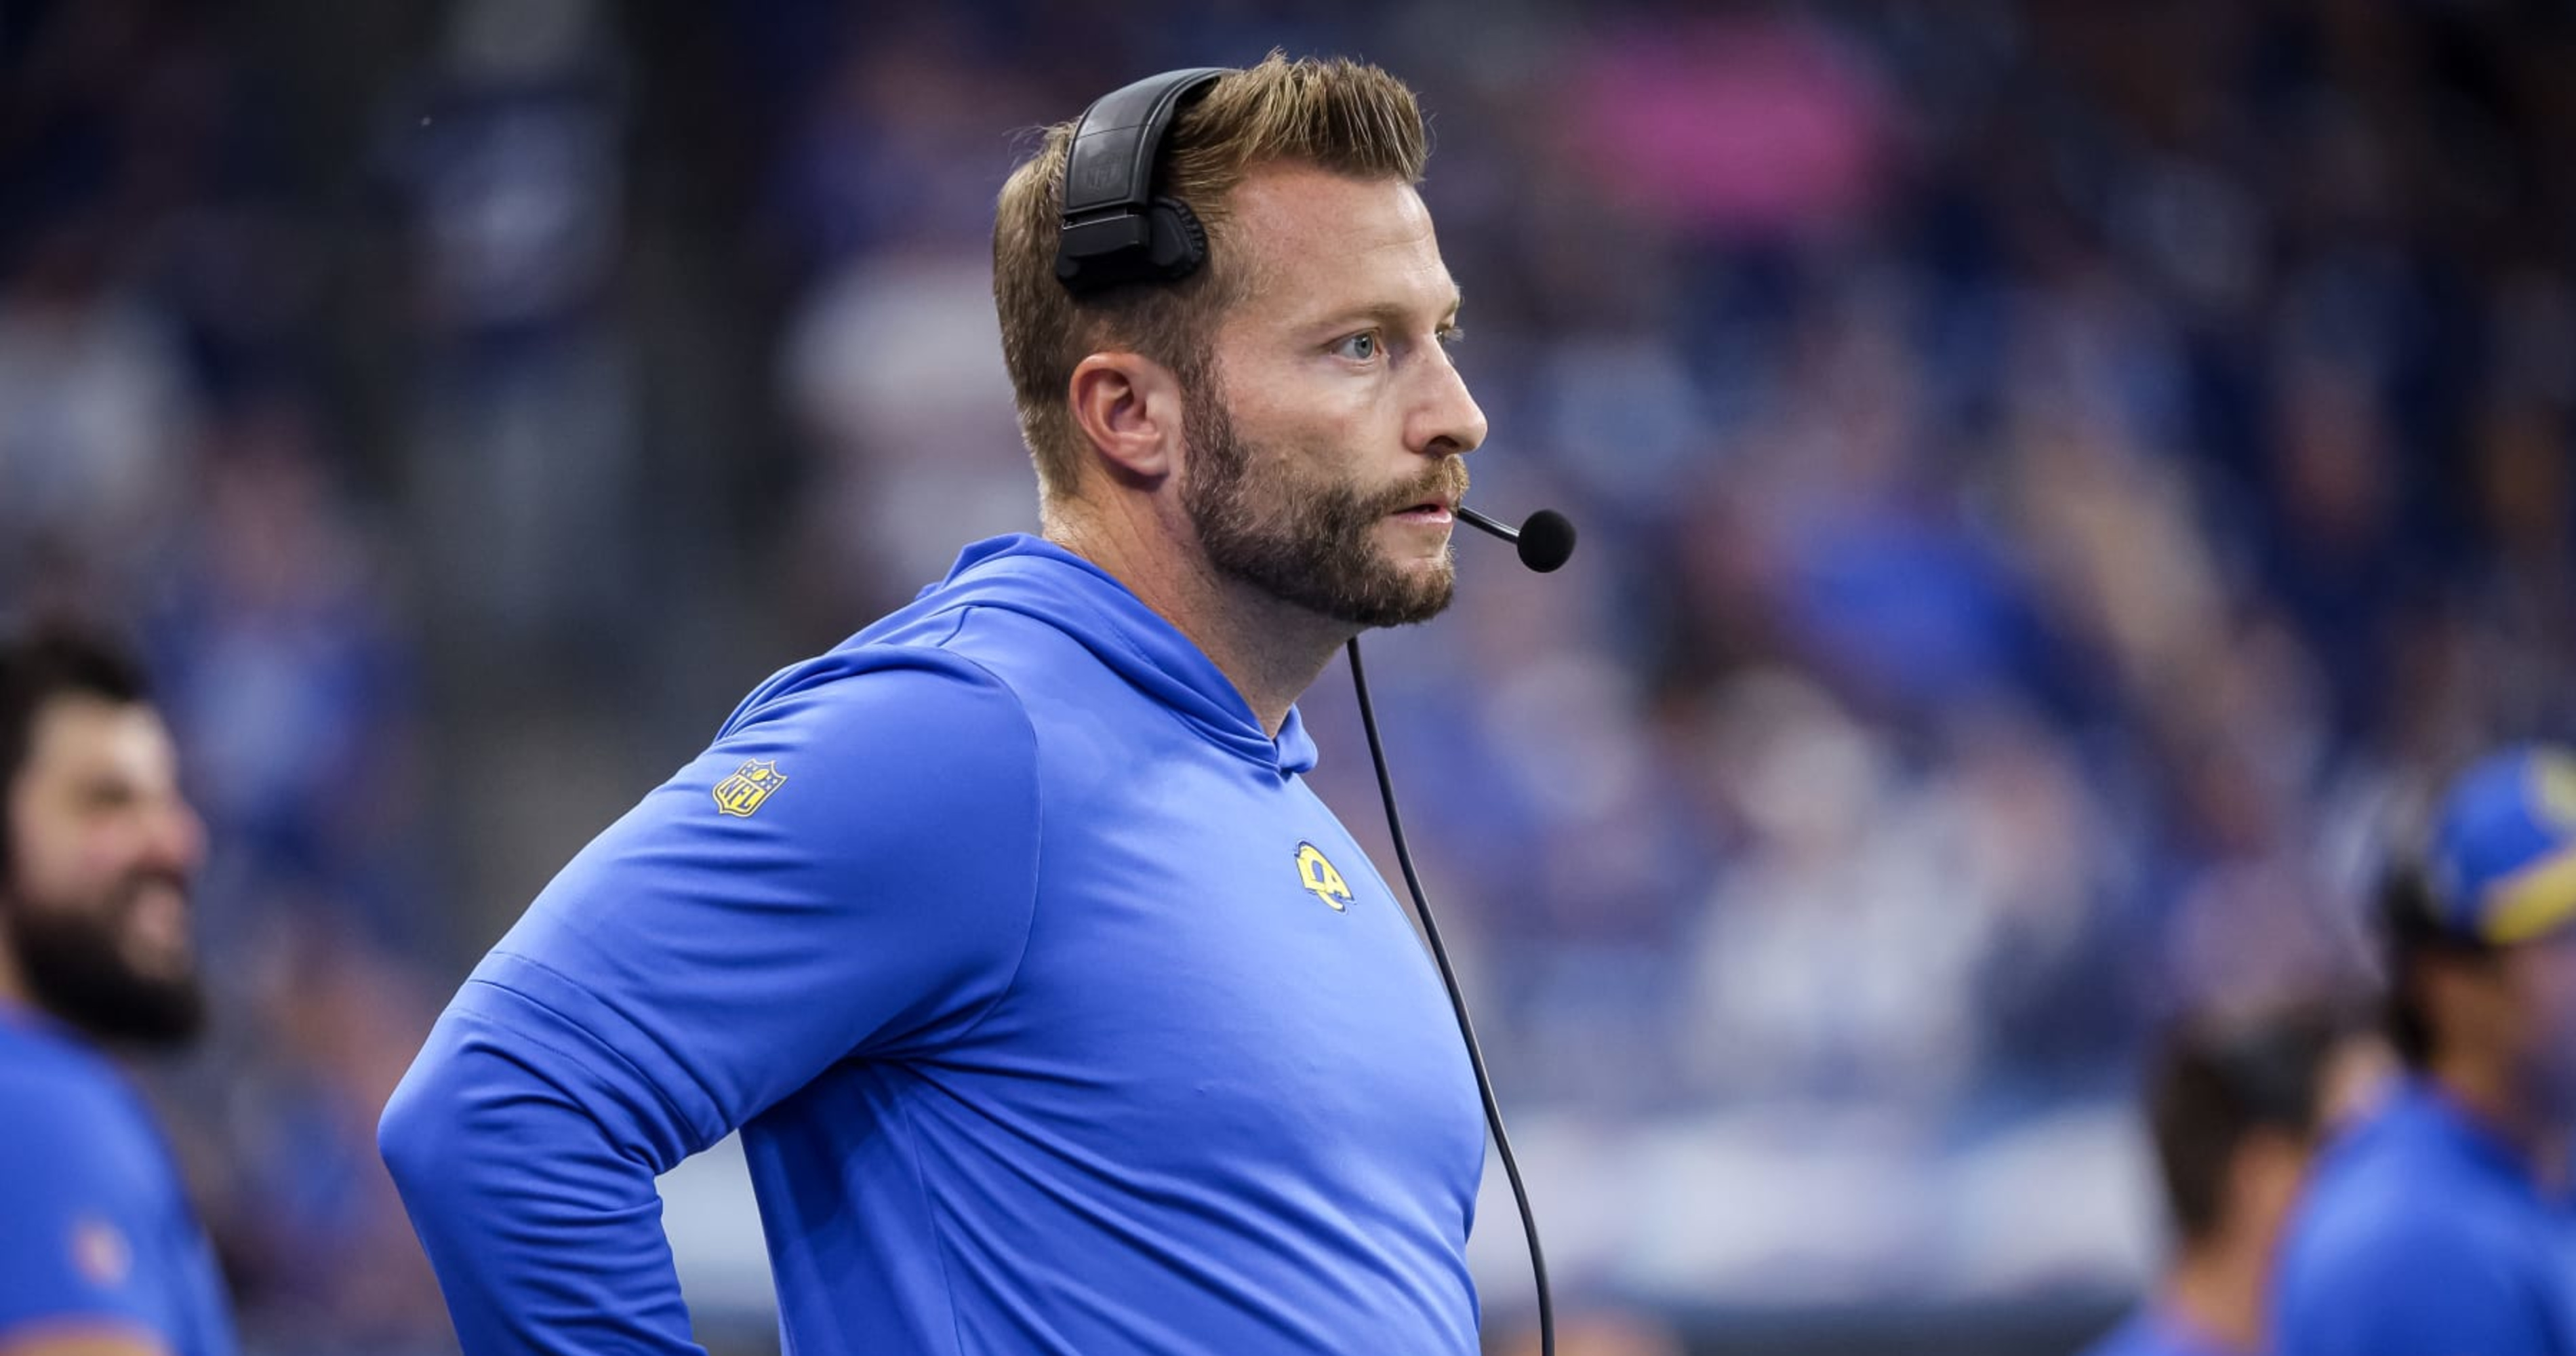 Rams coach Sean McVay could miss Sunday's game with wife expected